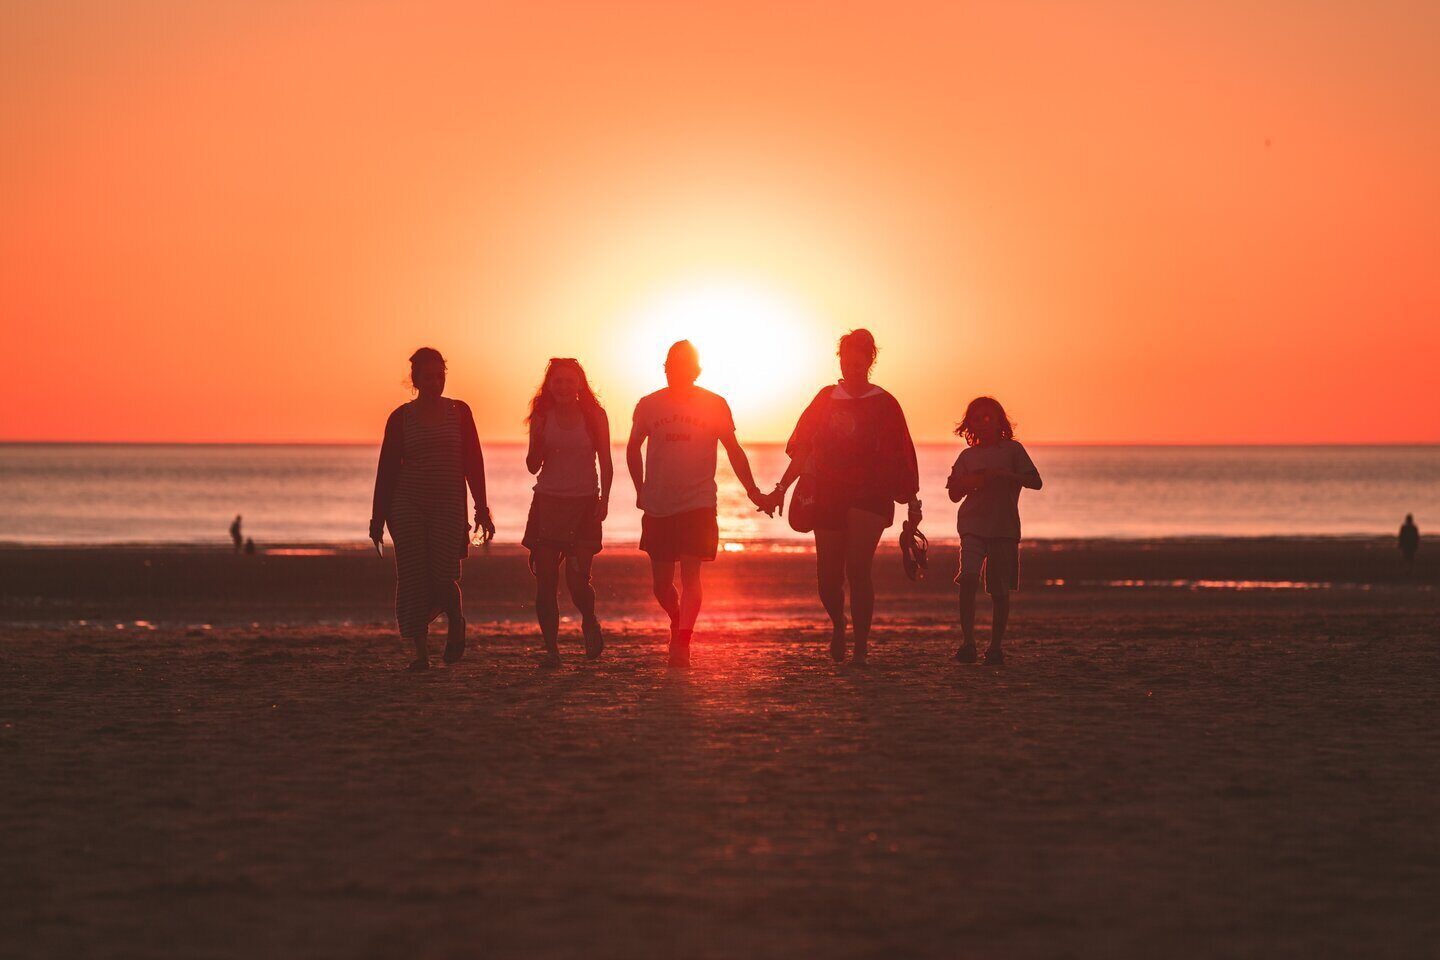 Silhouettes of five people facing a sunset over the water.